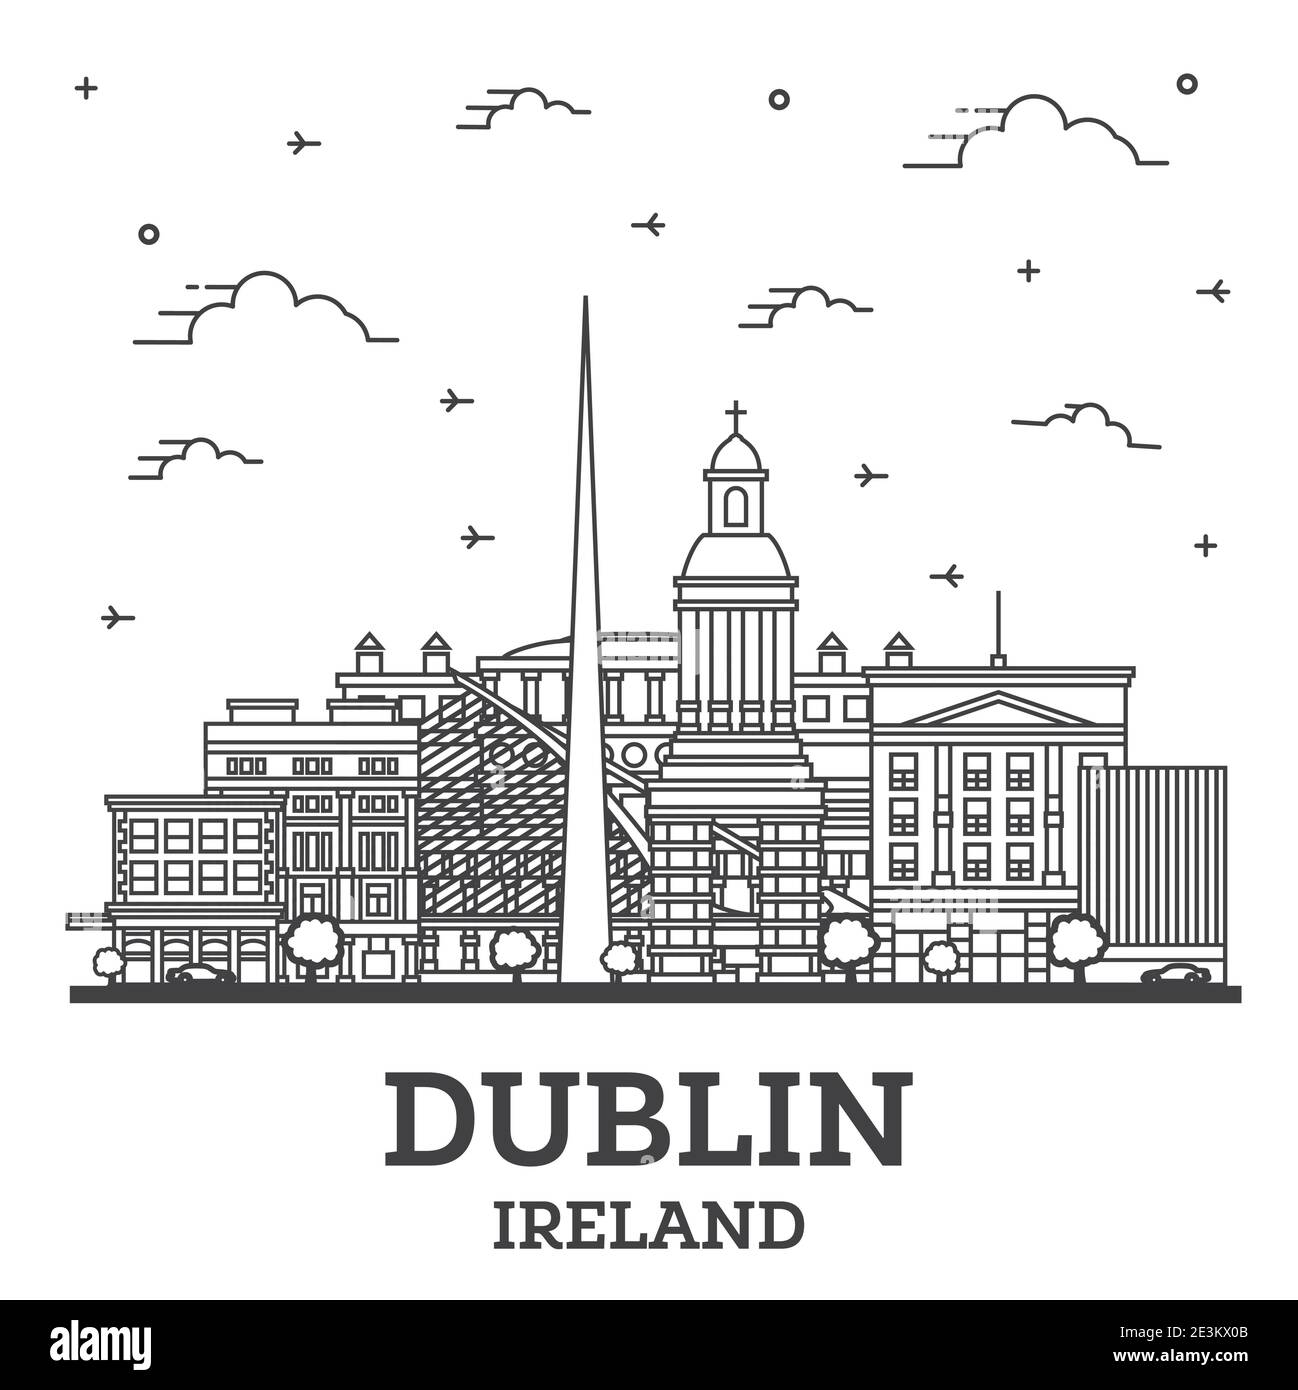 Dublin city ireland Cut Out Stock Images & Pictures - Alamy